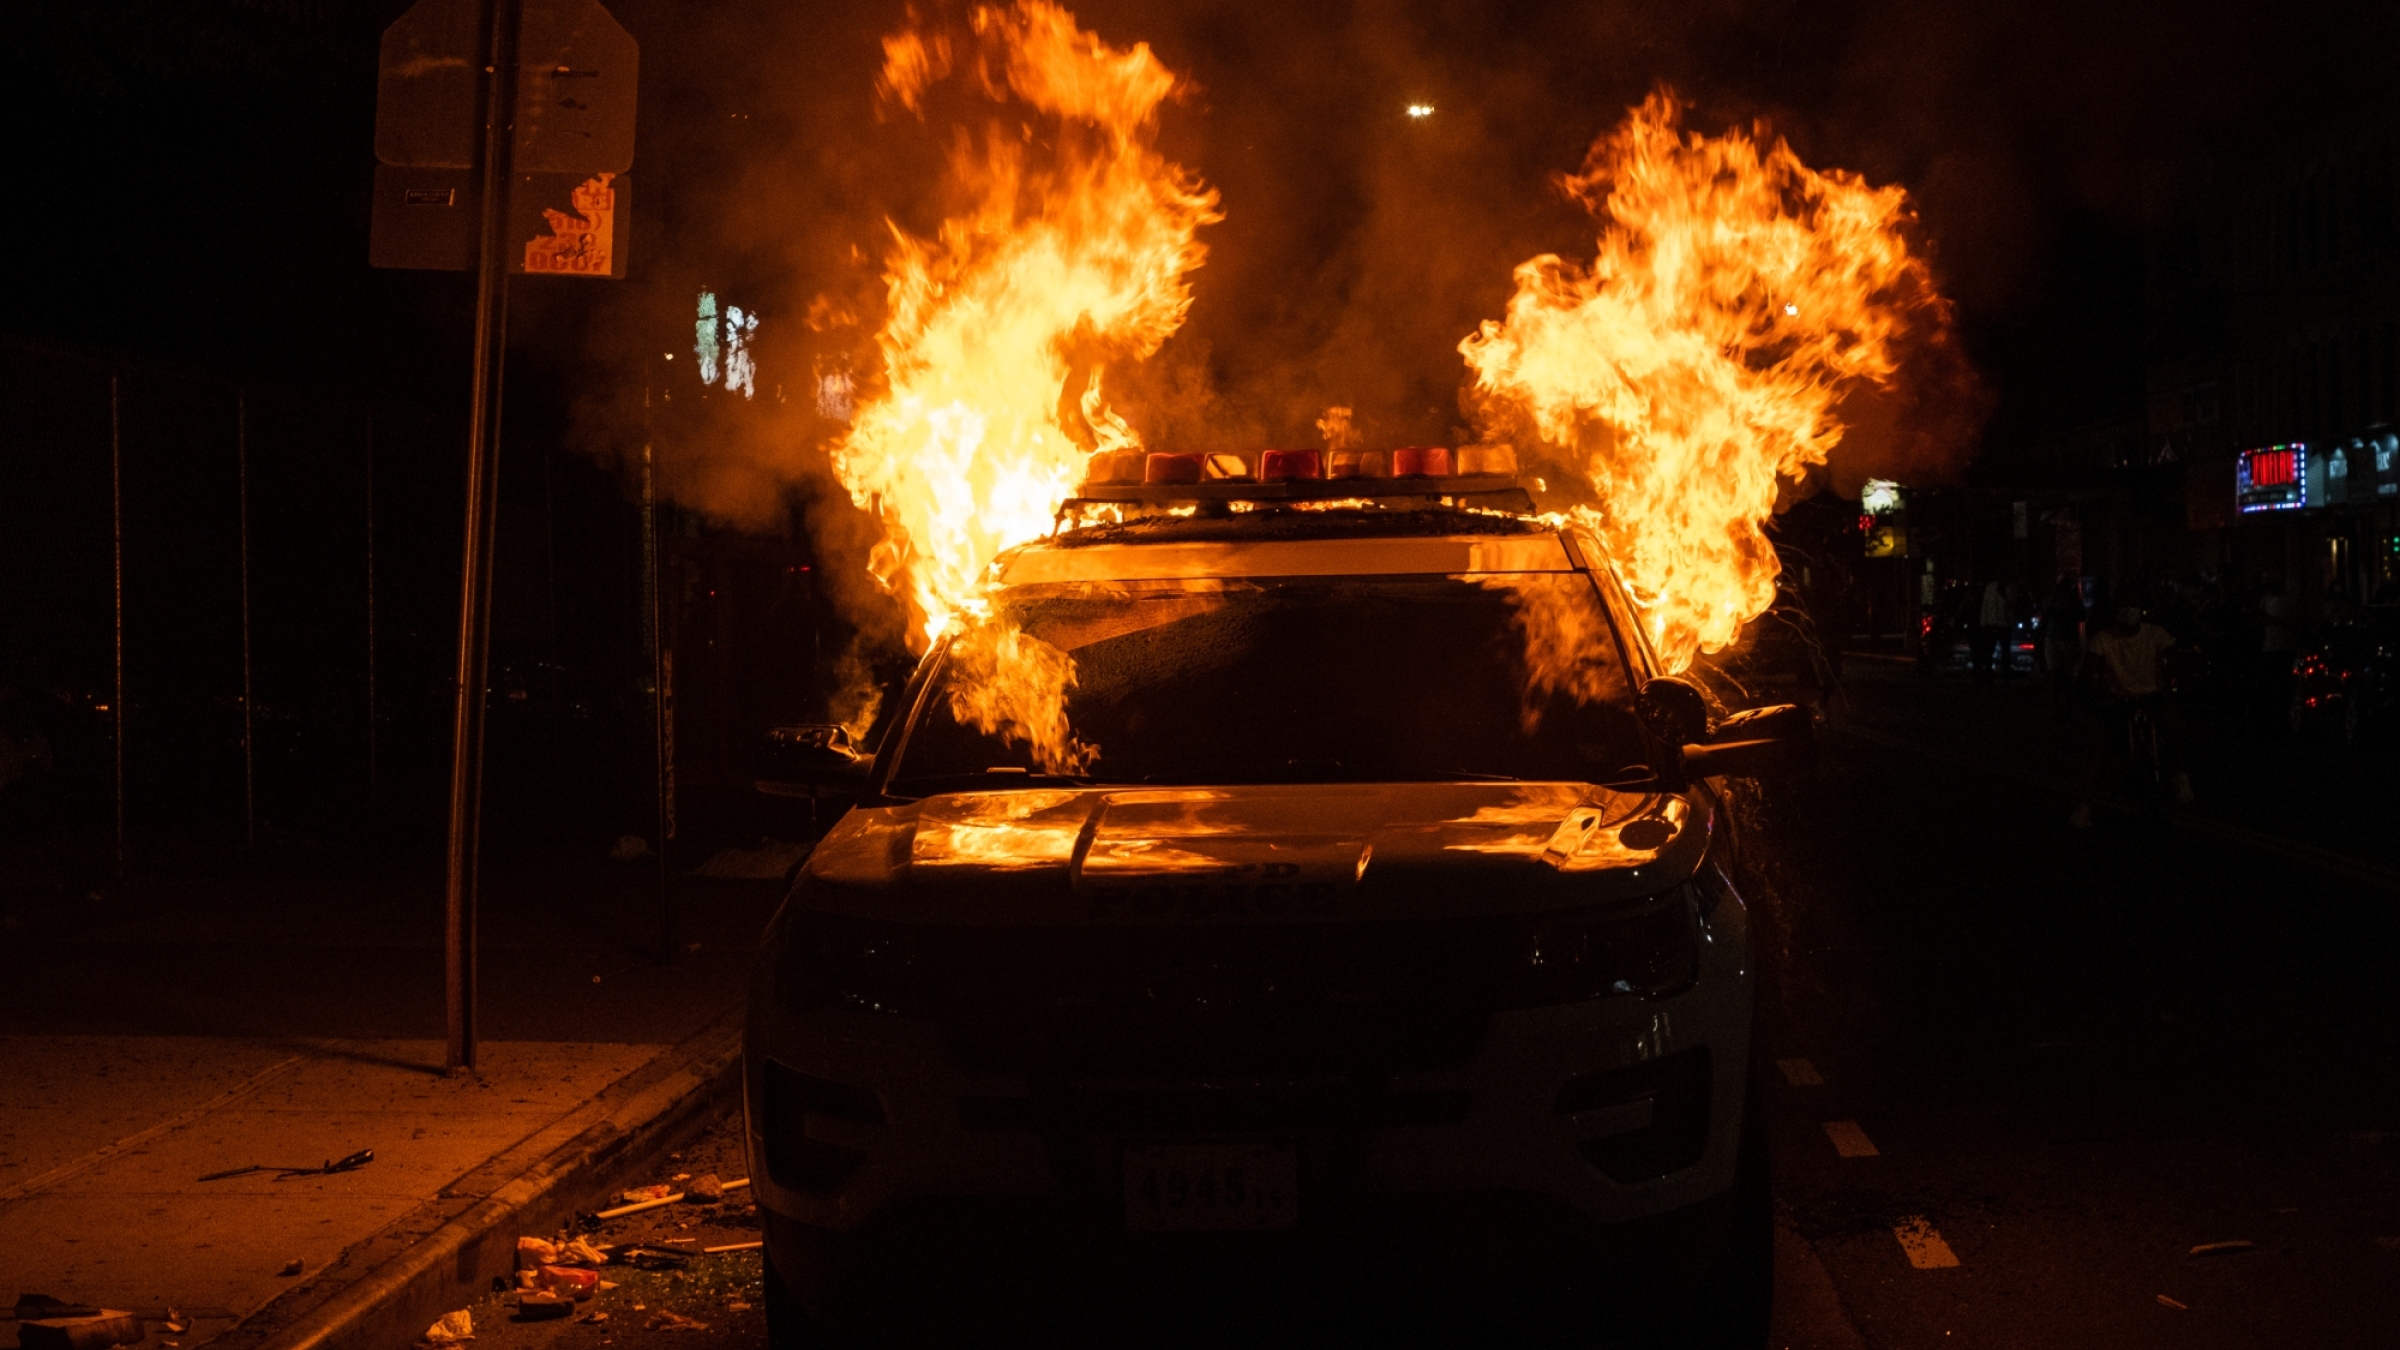 Flames engulf a New York Police Department (NYPD) vehicle in Flatbush, Brooklyn, on May 30, 2020.